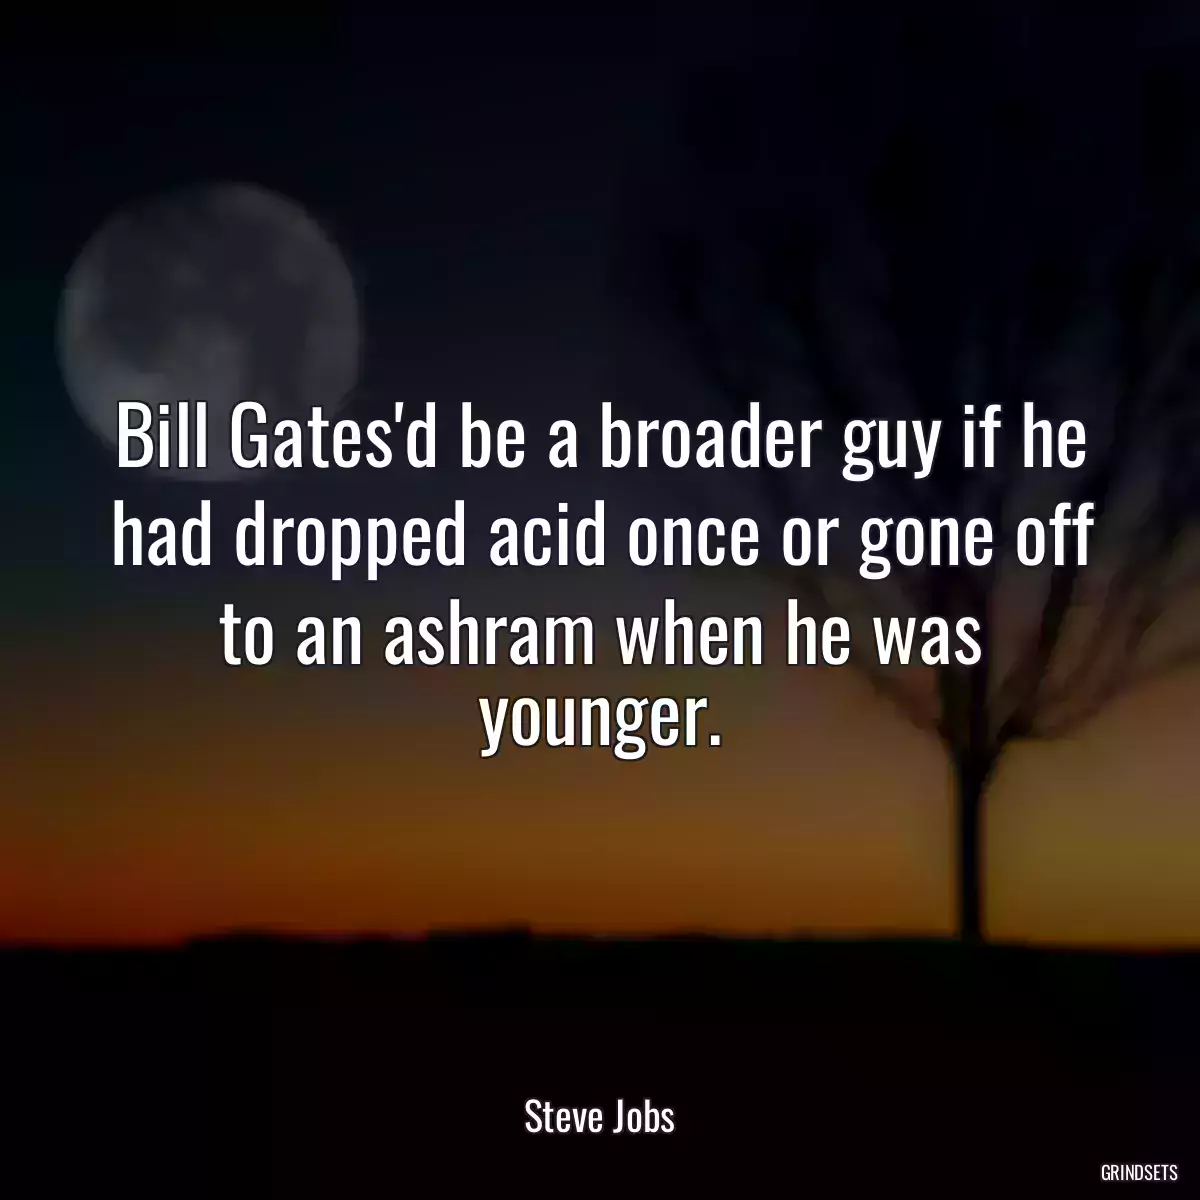 Bill Gates\'d be a broader guy if he had dropped acid once or gone off to an ashram when he was younger.